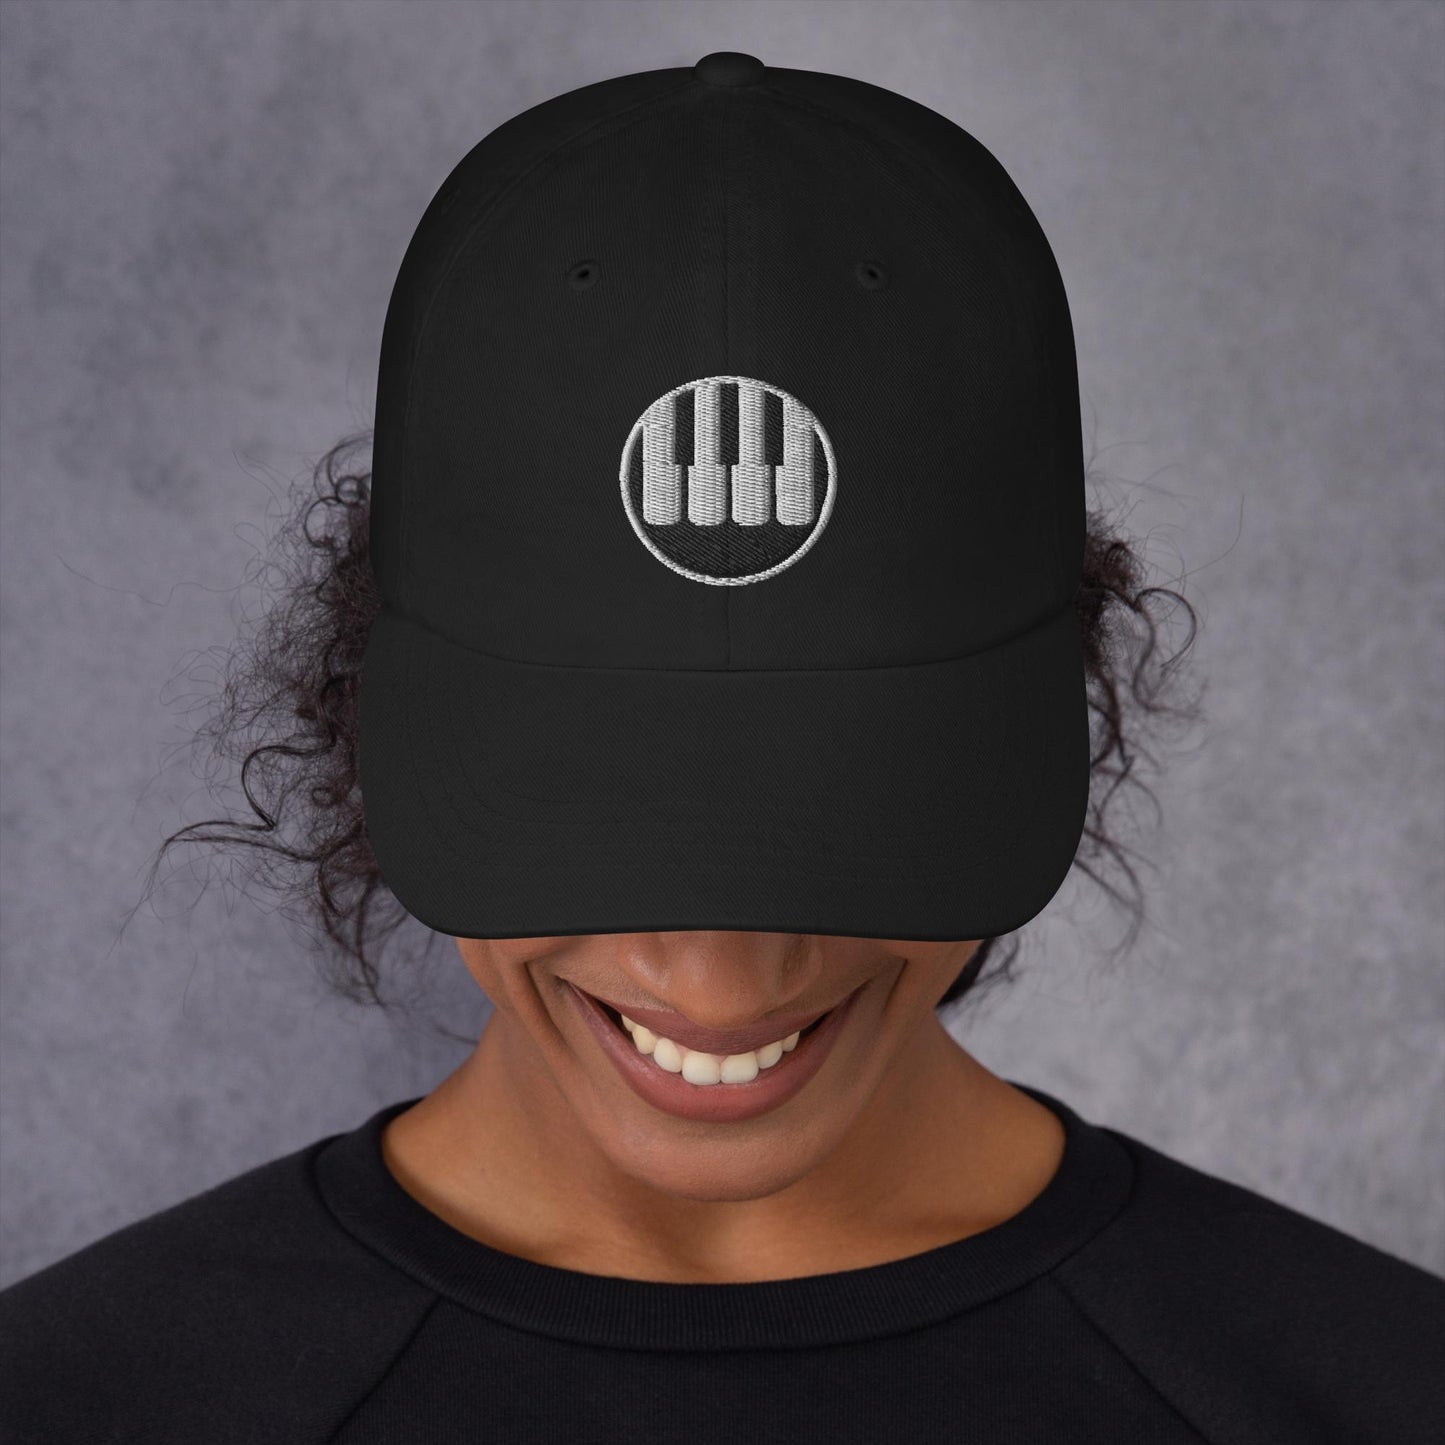 Piano keys. A Hat for pianists